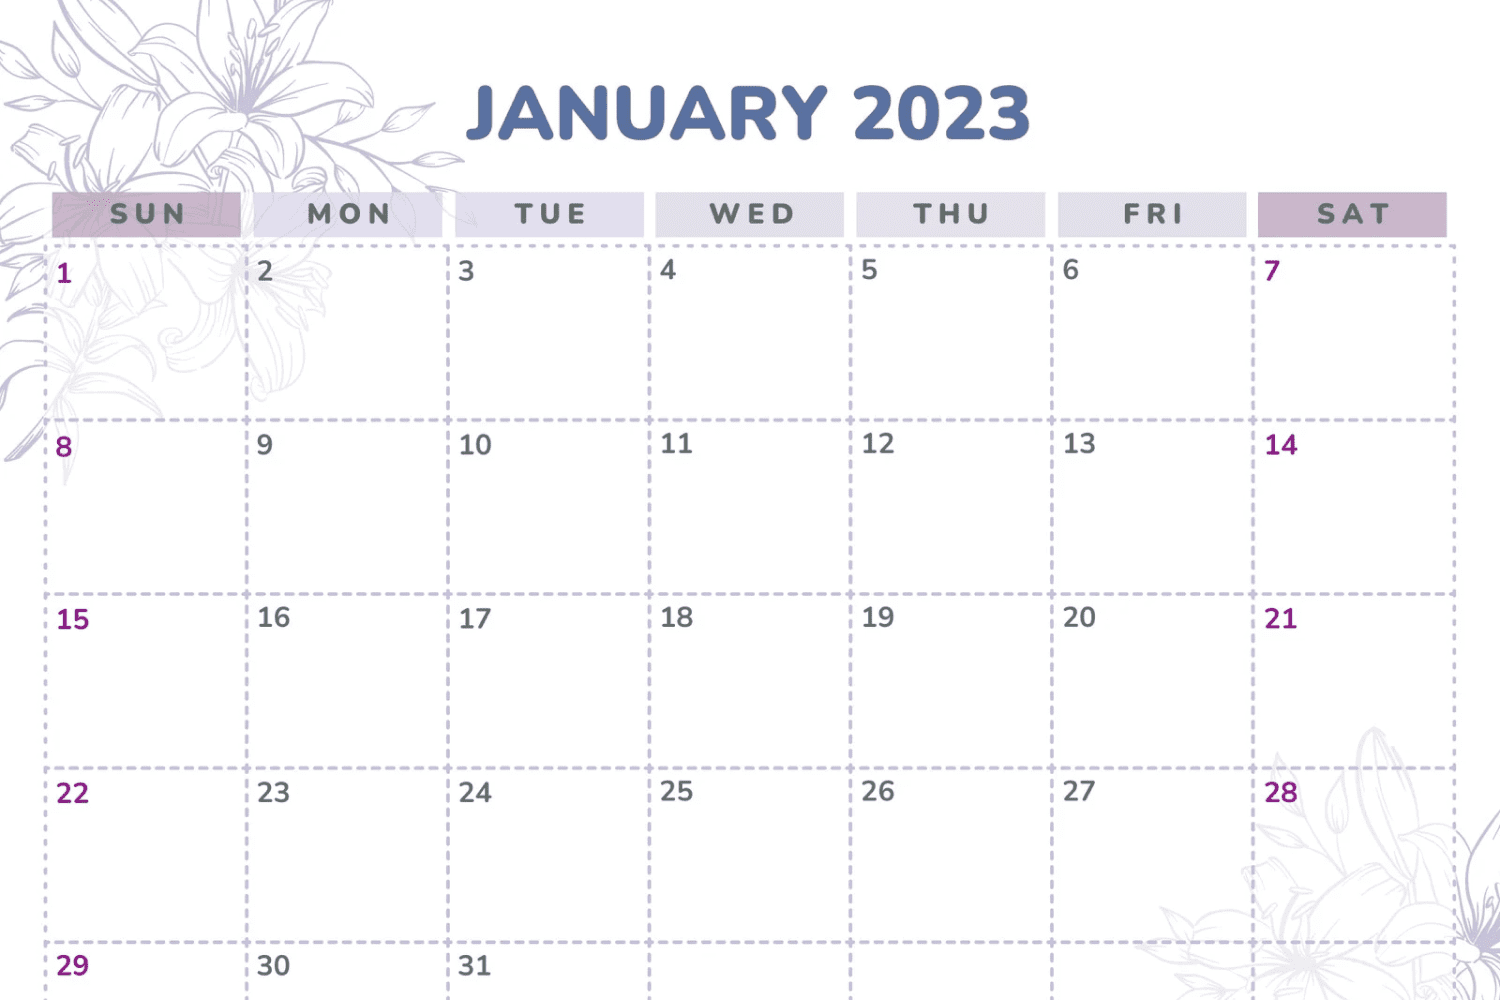 January calendar in a purple and pink color palette.